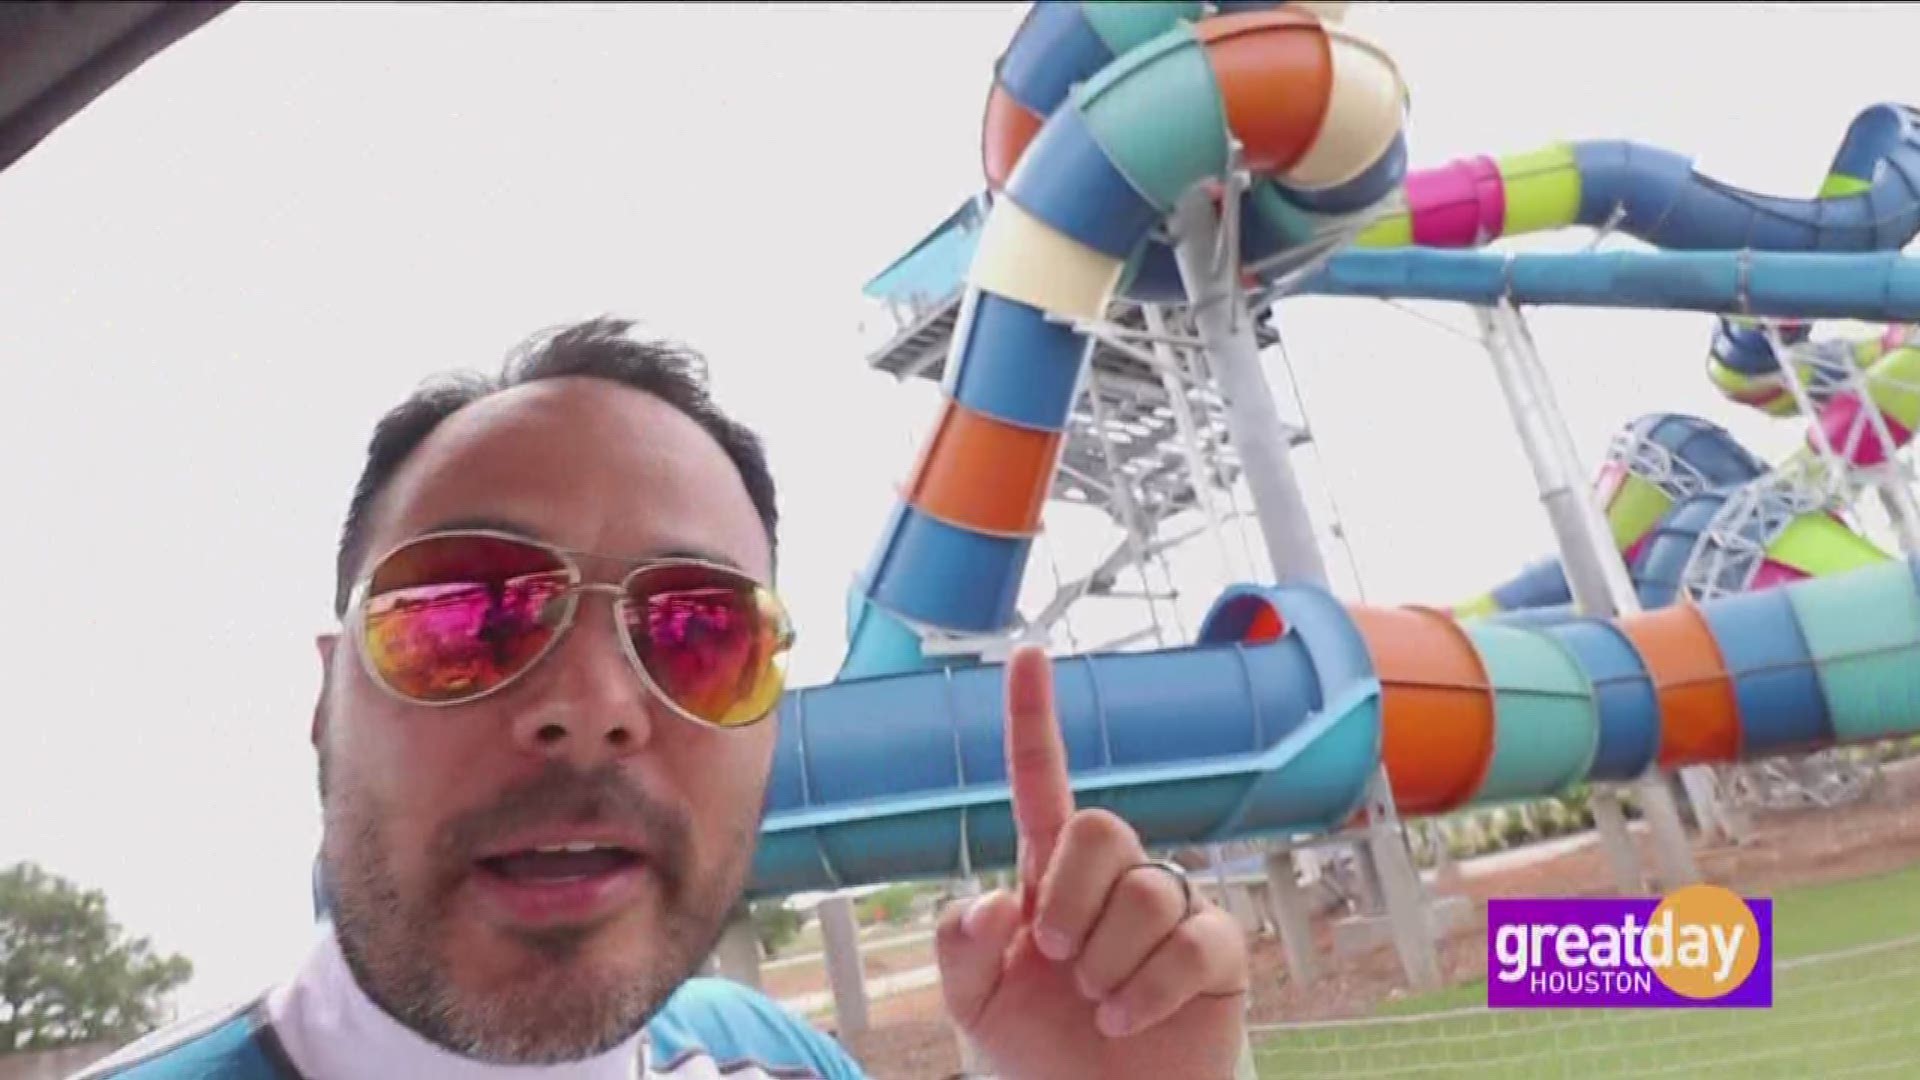 Ride along with Cristina Kooker and Ralph Garcia in the new YouTube series, Local Lens Houston. Experience all Houston has to offer with this wacky duo... they are often funny, and always unpredictable!  On this episode, they take us on a trip to Splashway Waterpark & Campground.